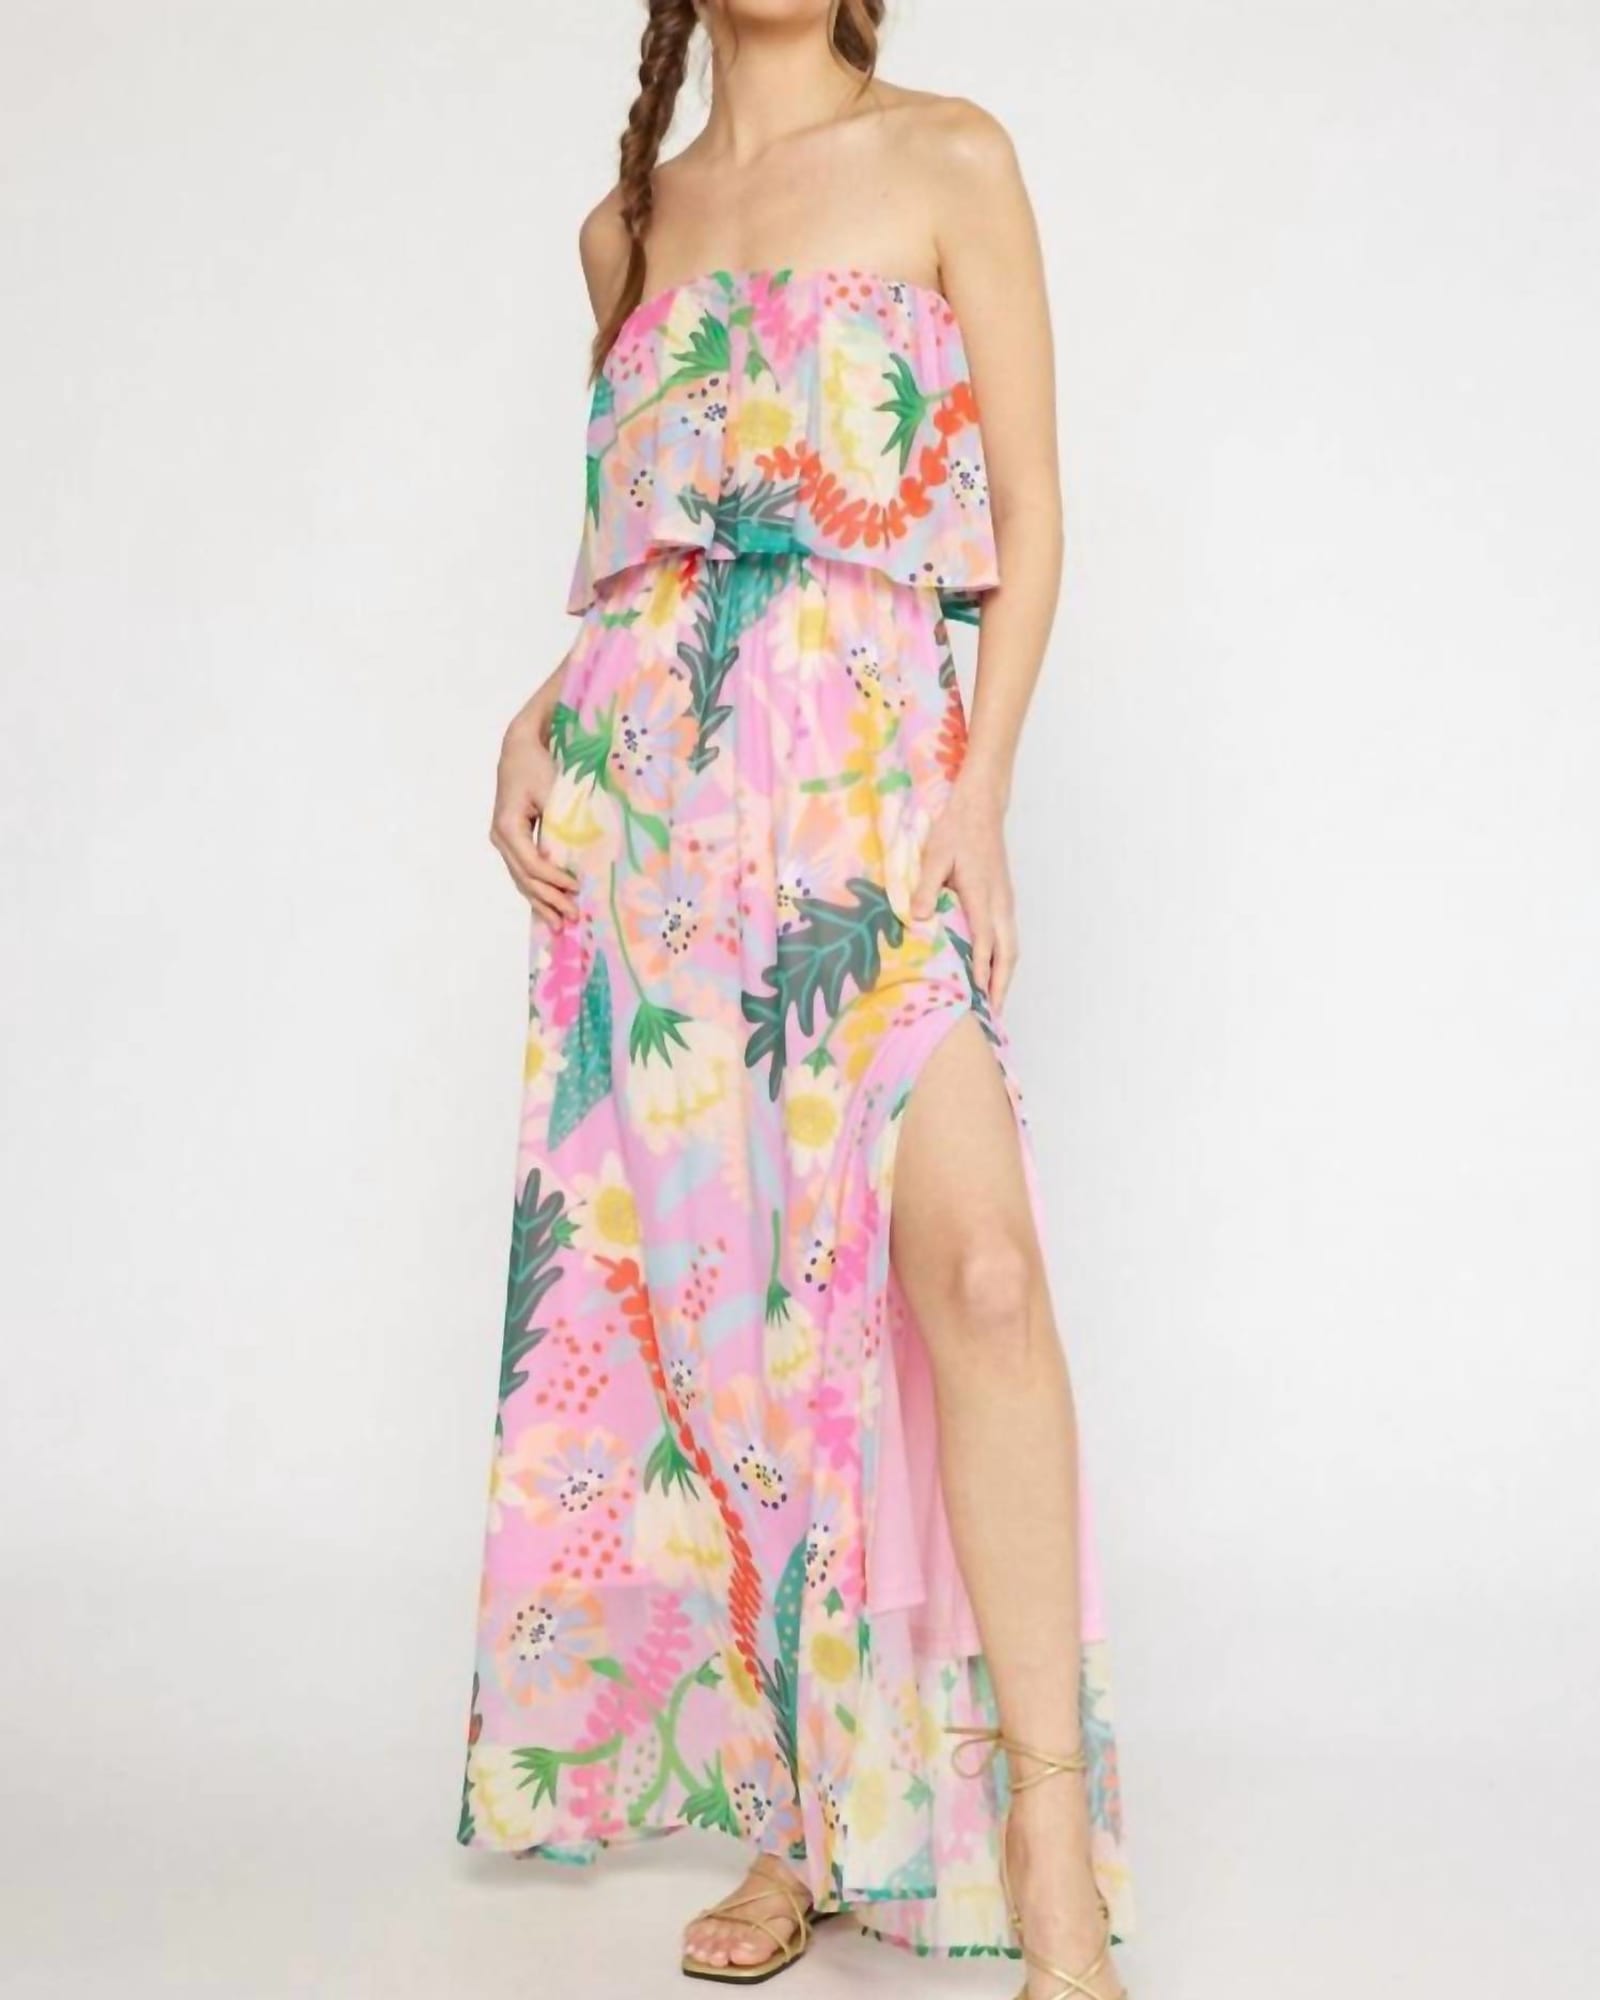 Away We Go Patterned Maxi Dress In Pink Floral | Pink Floral